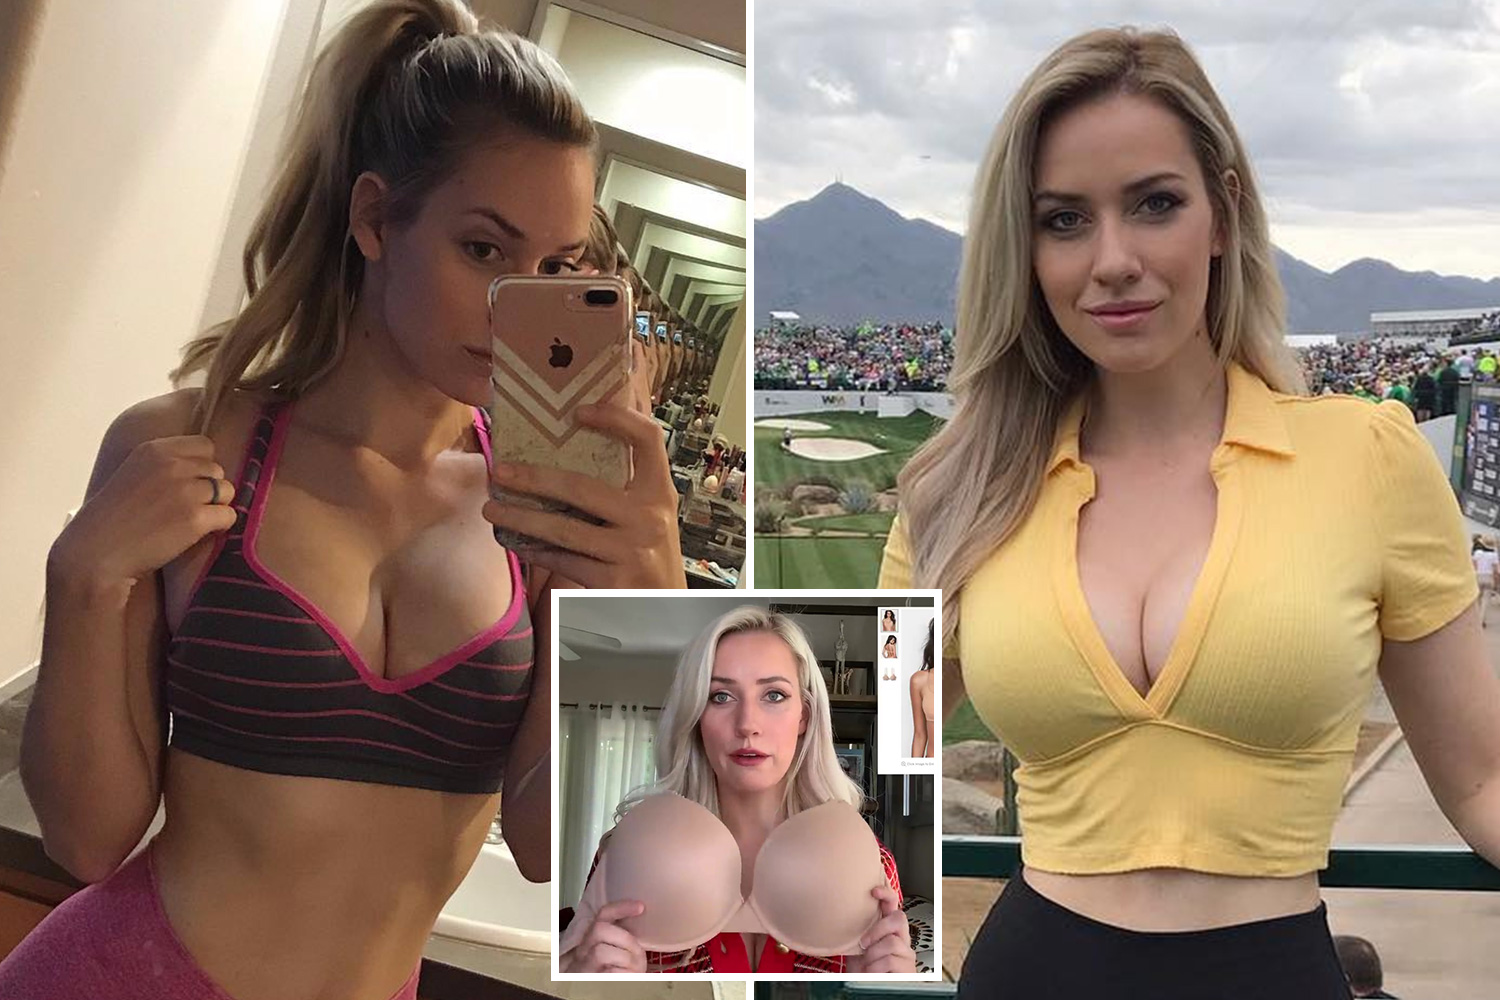 azlina awang kechil recommends 34 Double D Tits